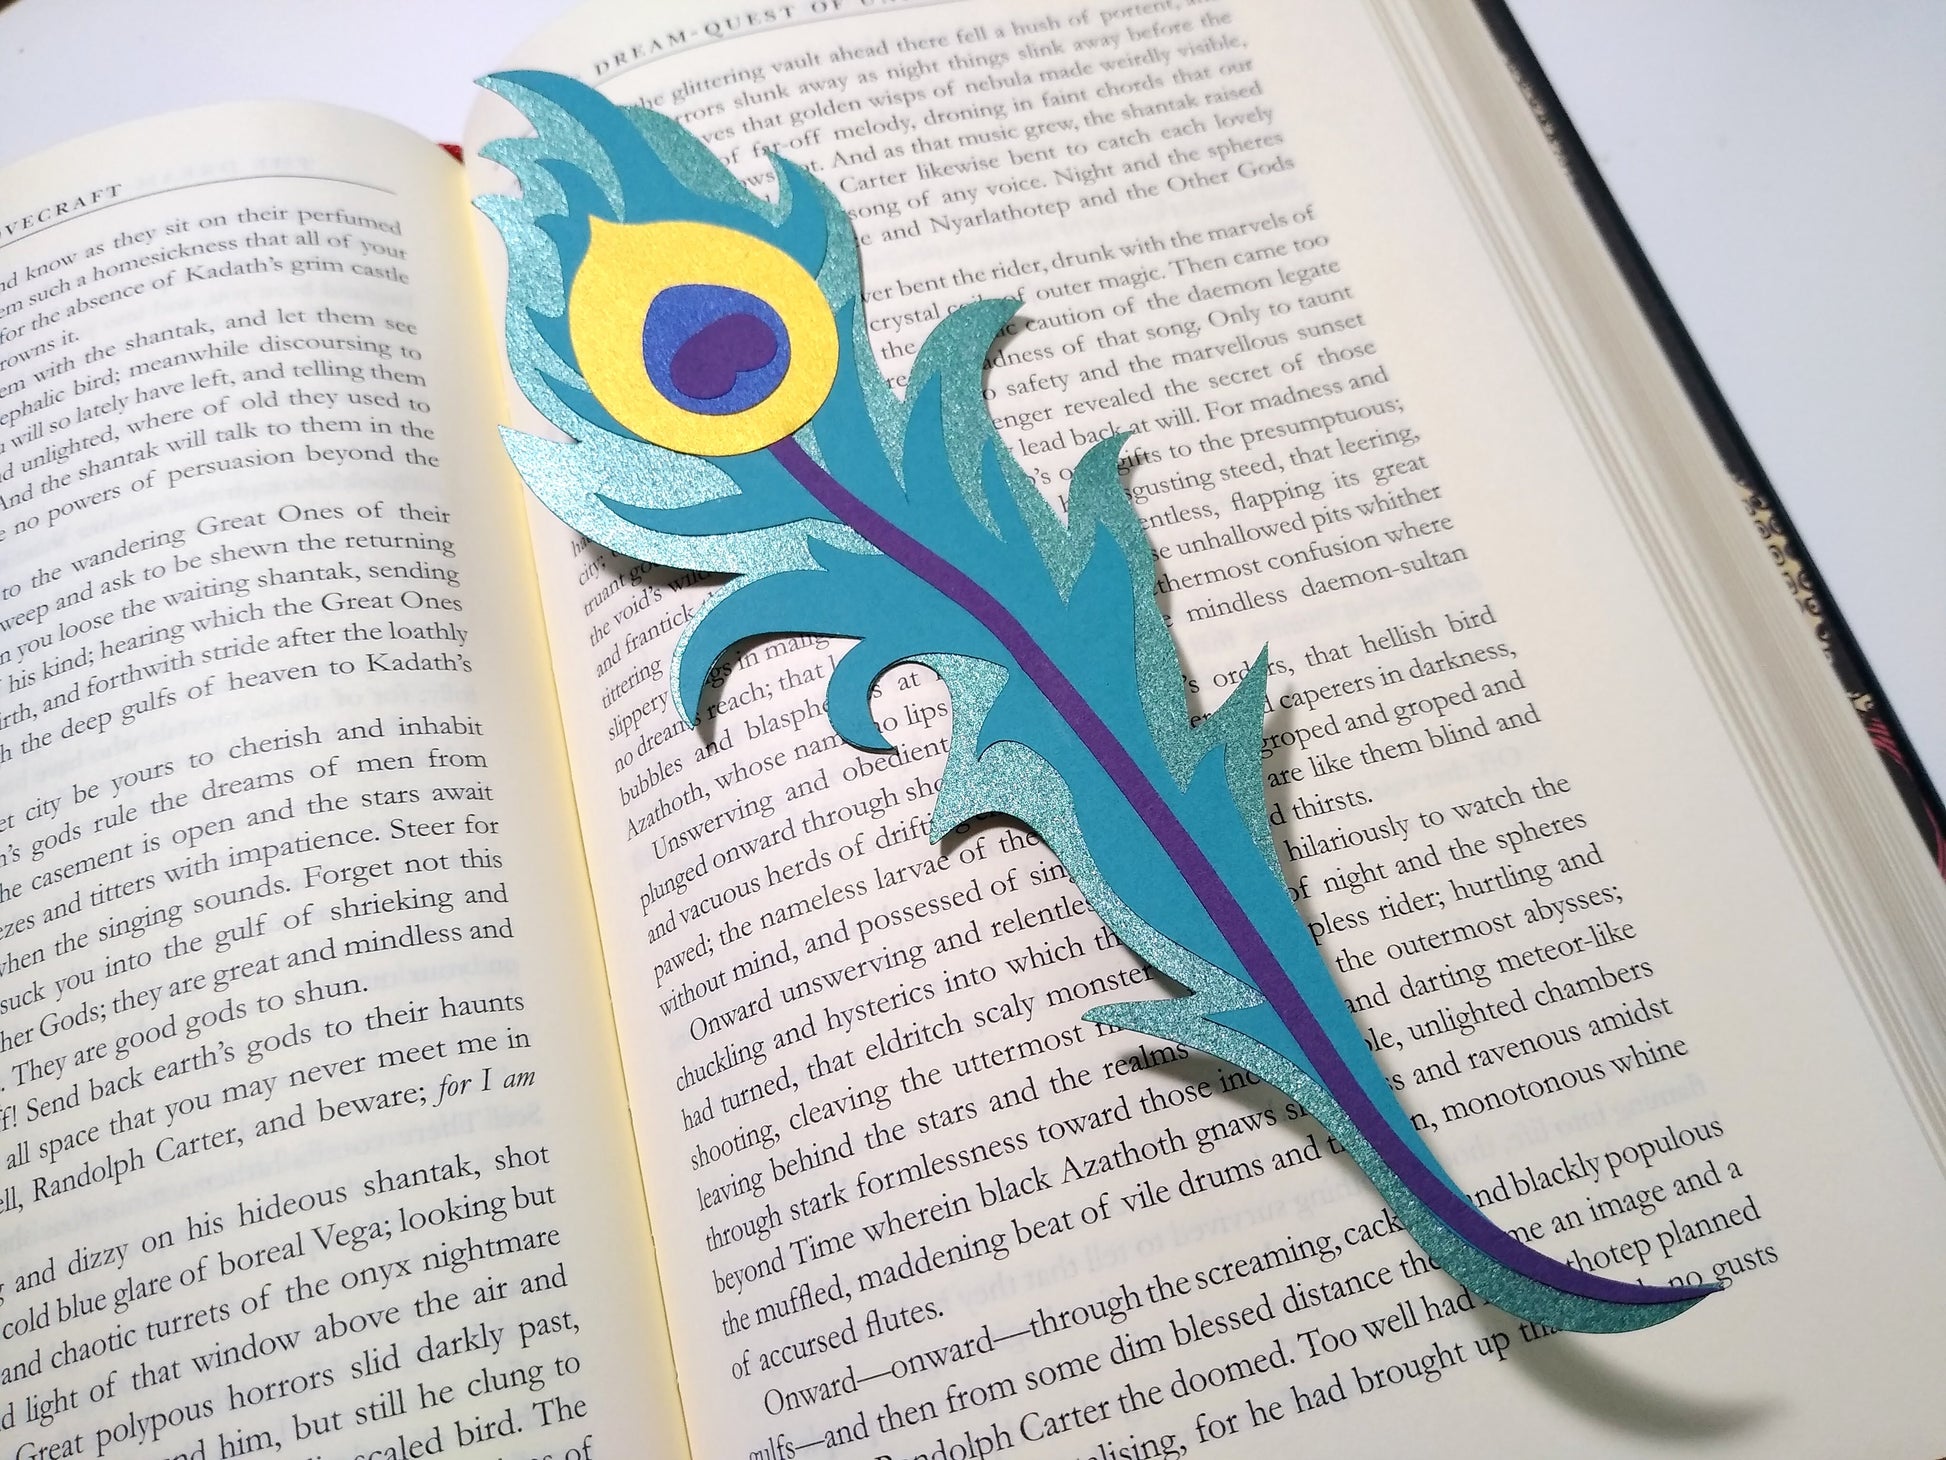 A multi-layer paper bookmark lays on an open book. Designed to look like a long peacock feather, the layers include a shiny teal, gold, purple, metallic blue, and a flat teal.